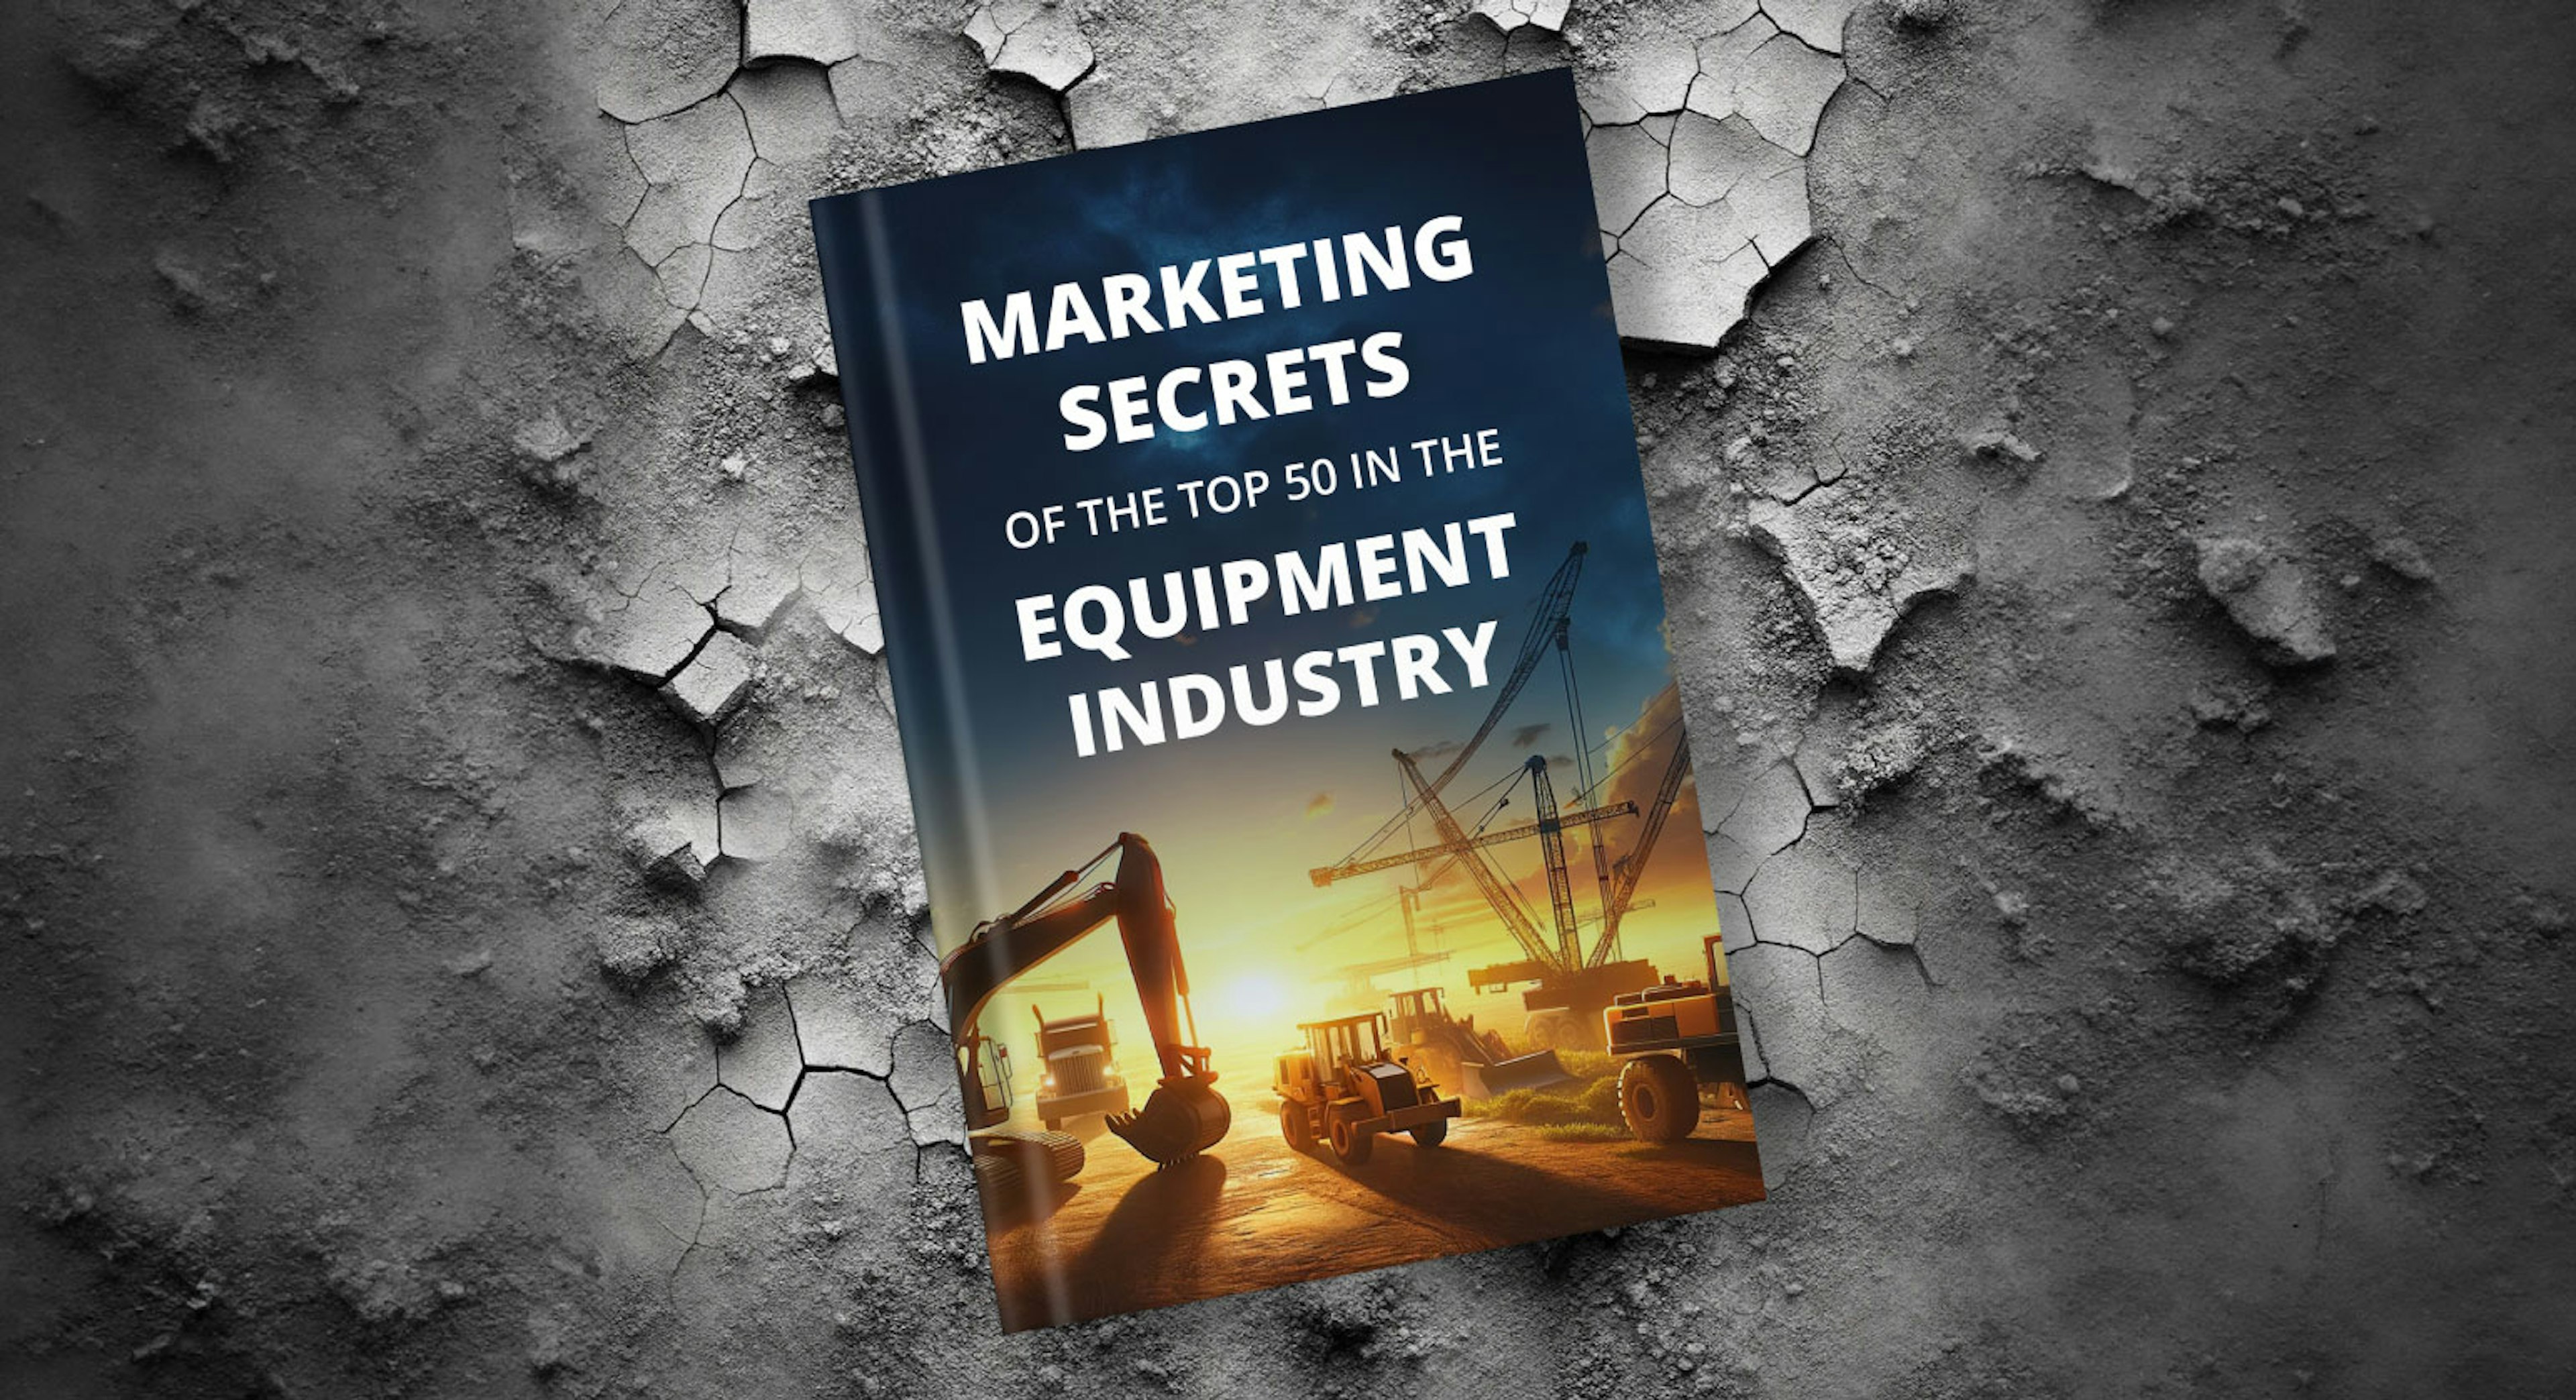 State of Digital Marketing in the Equipment Industry